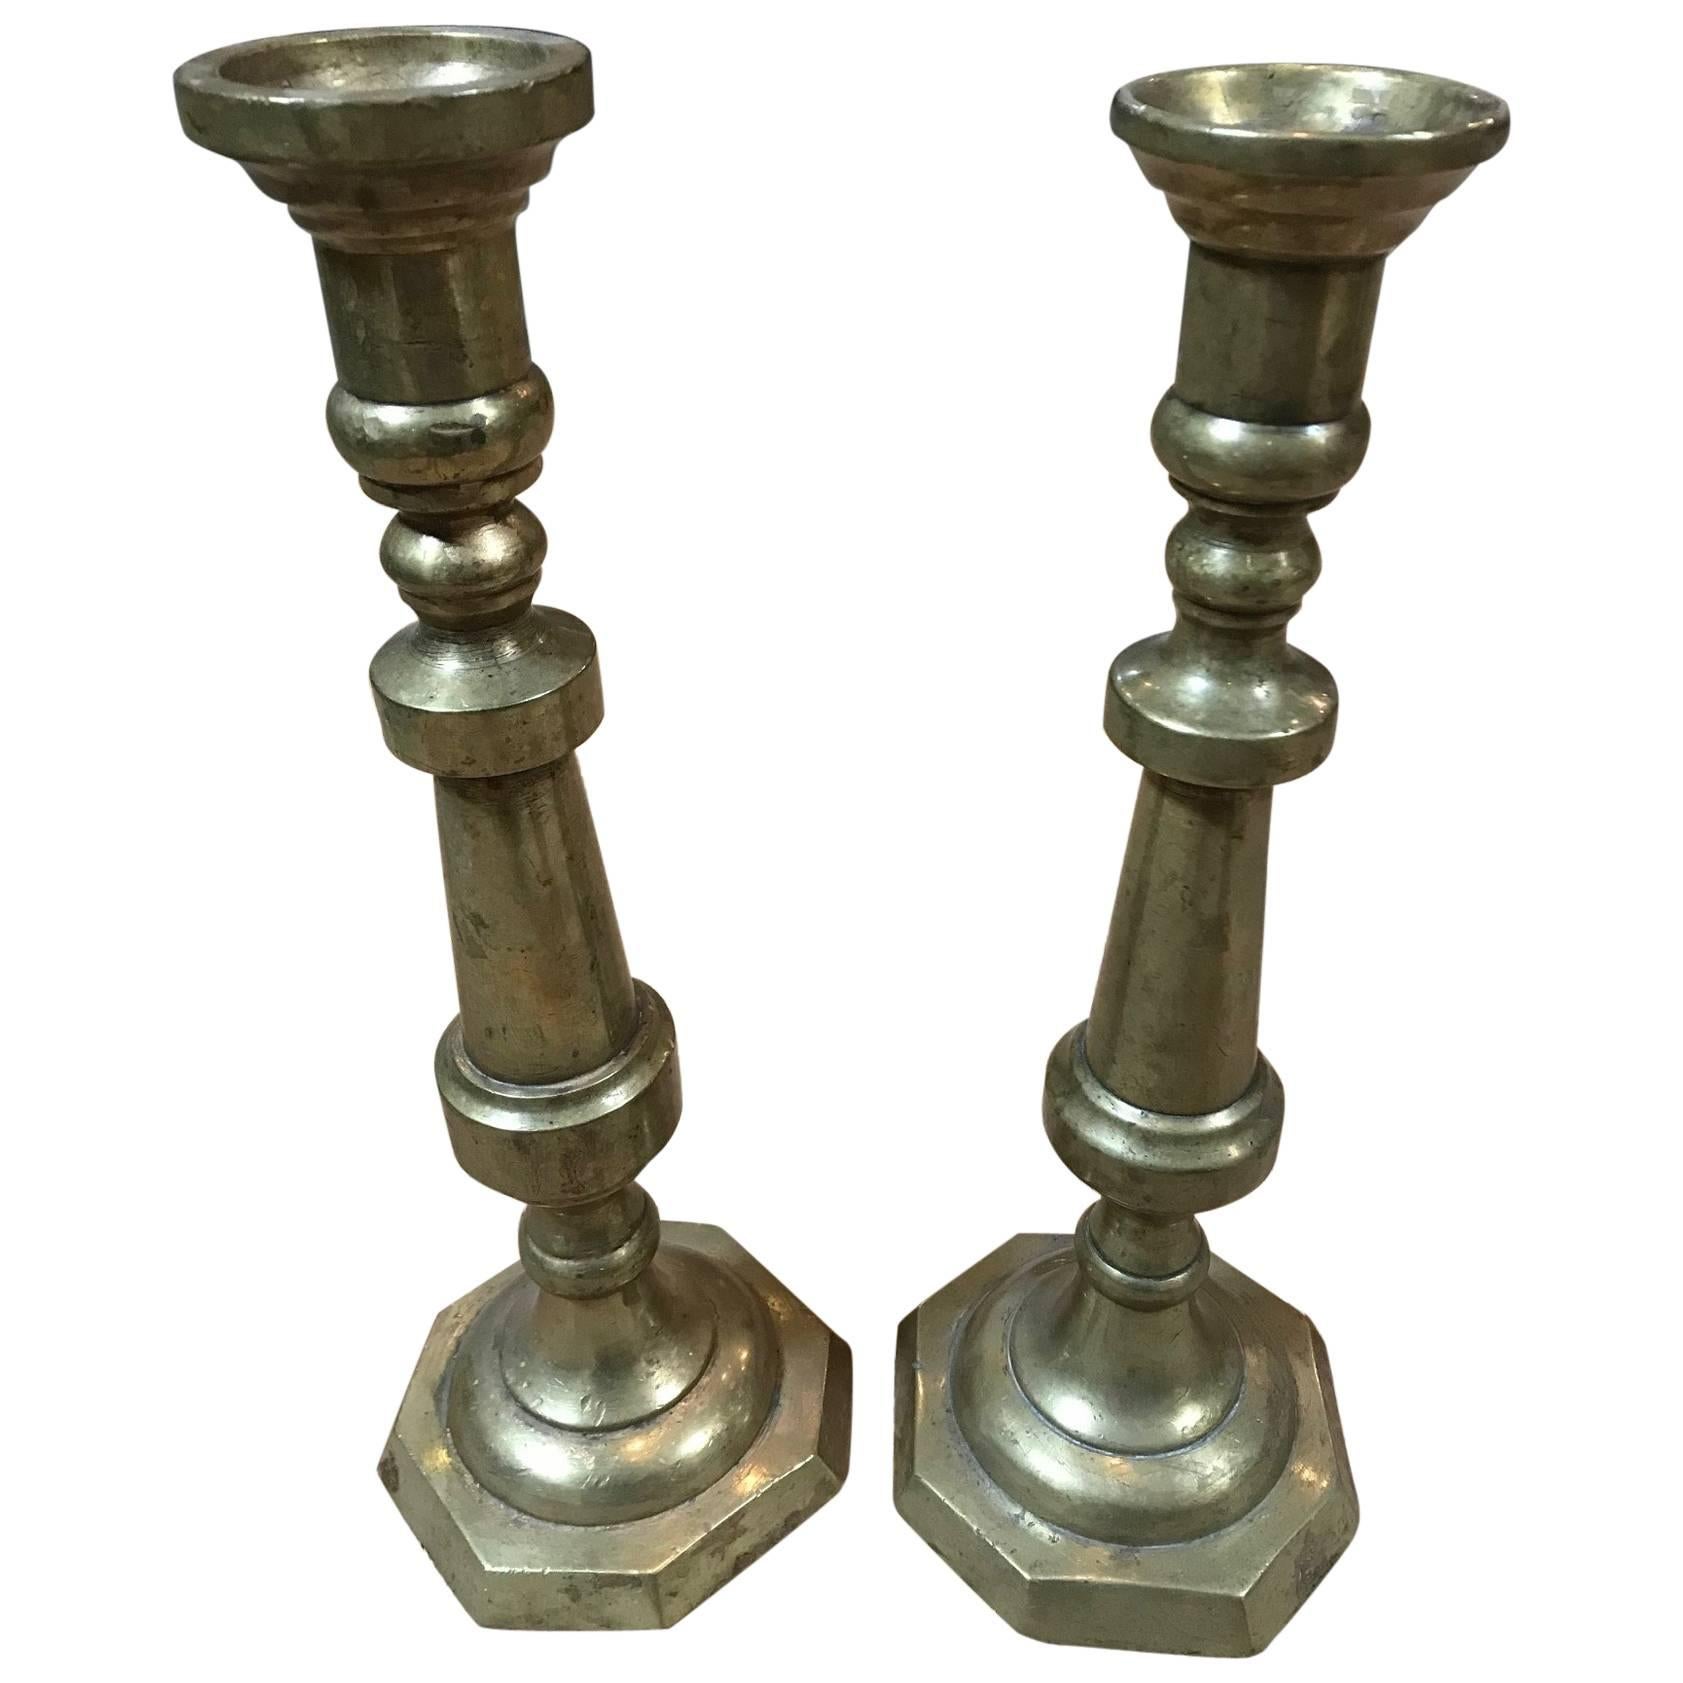 Colonial Mexican Candlesticks, Pair